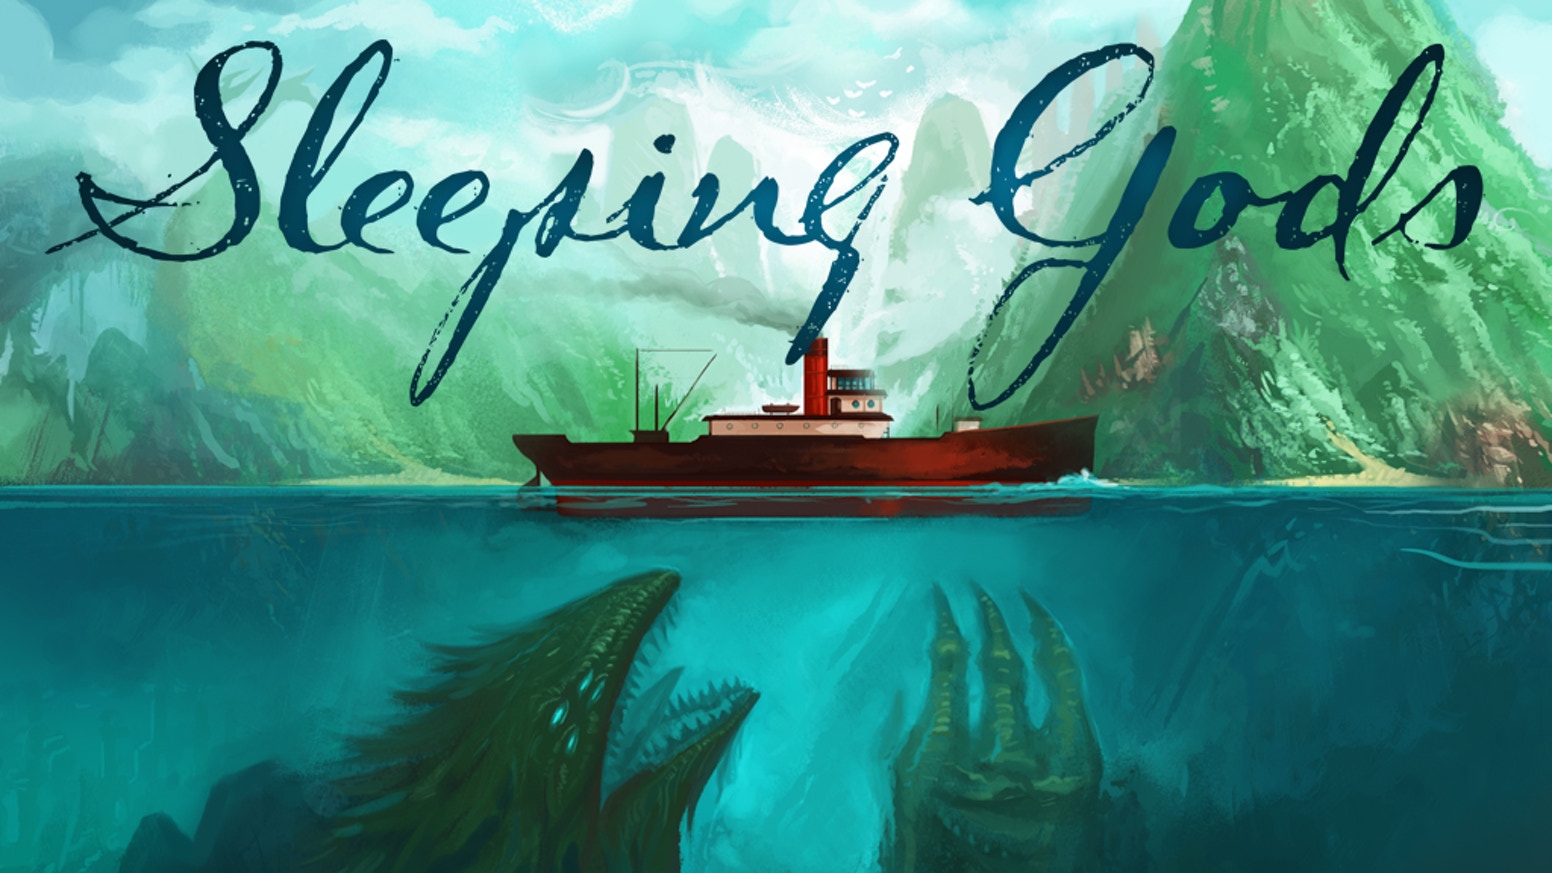 Sleeping Gods is Exactly What I Want from an Exploration Game